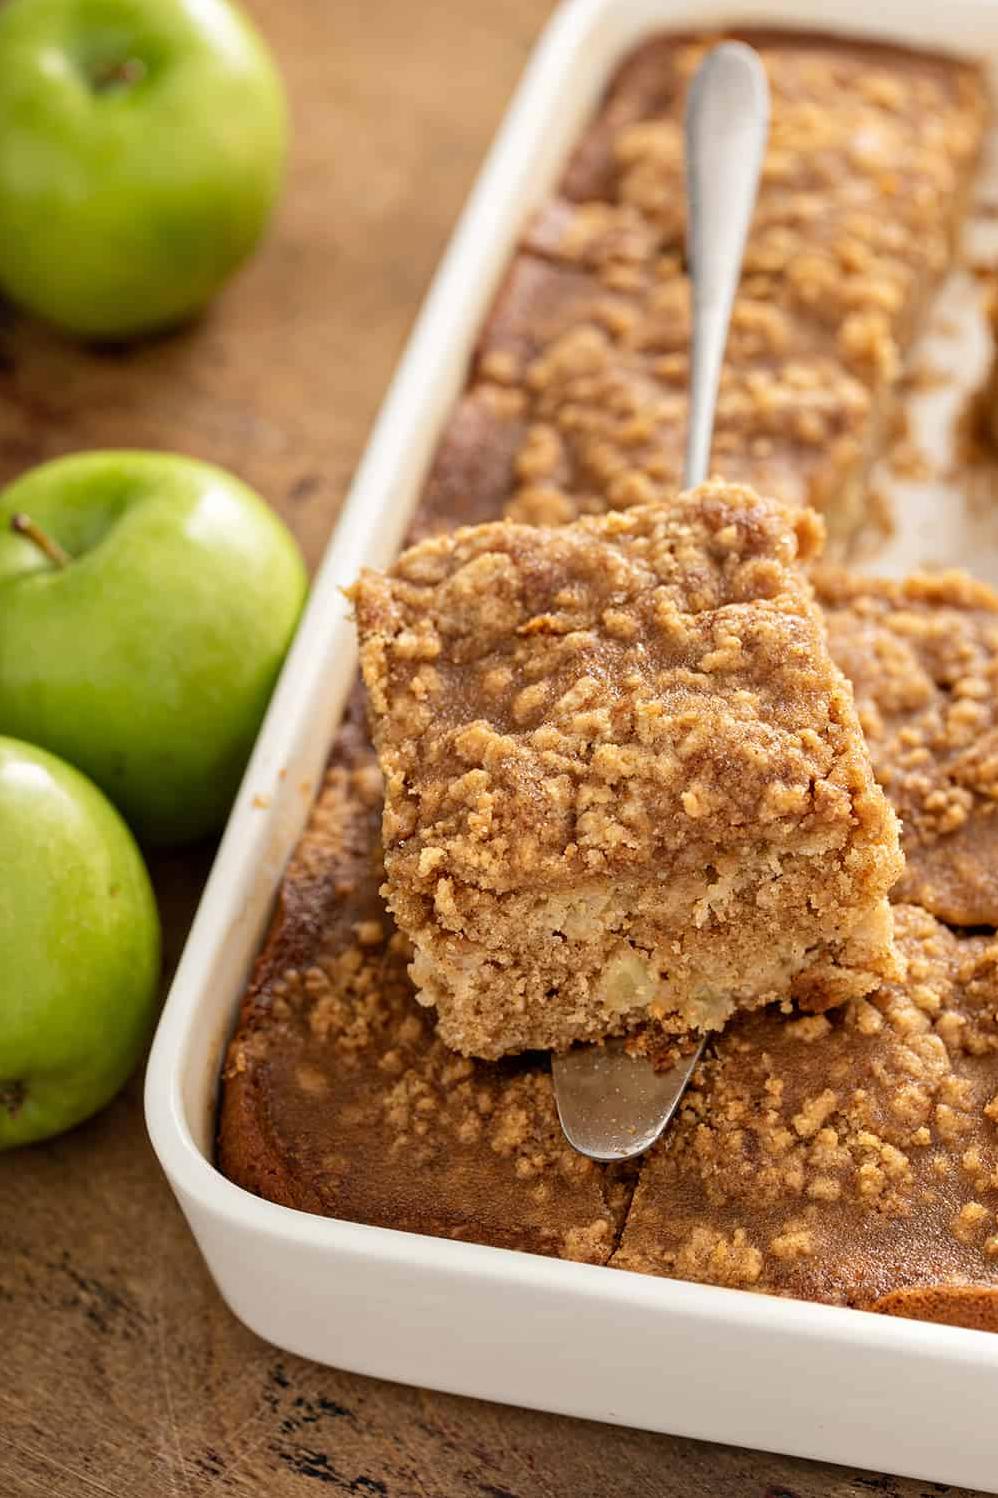  Who needs candles when you can fill your home with the aroma of freshly baked apple coffee cake?